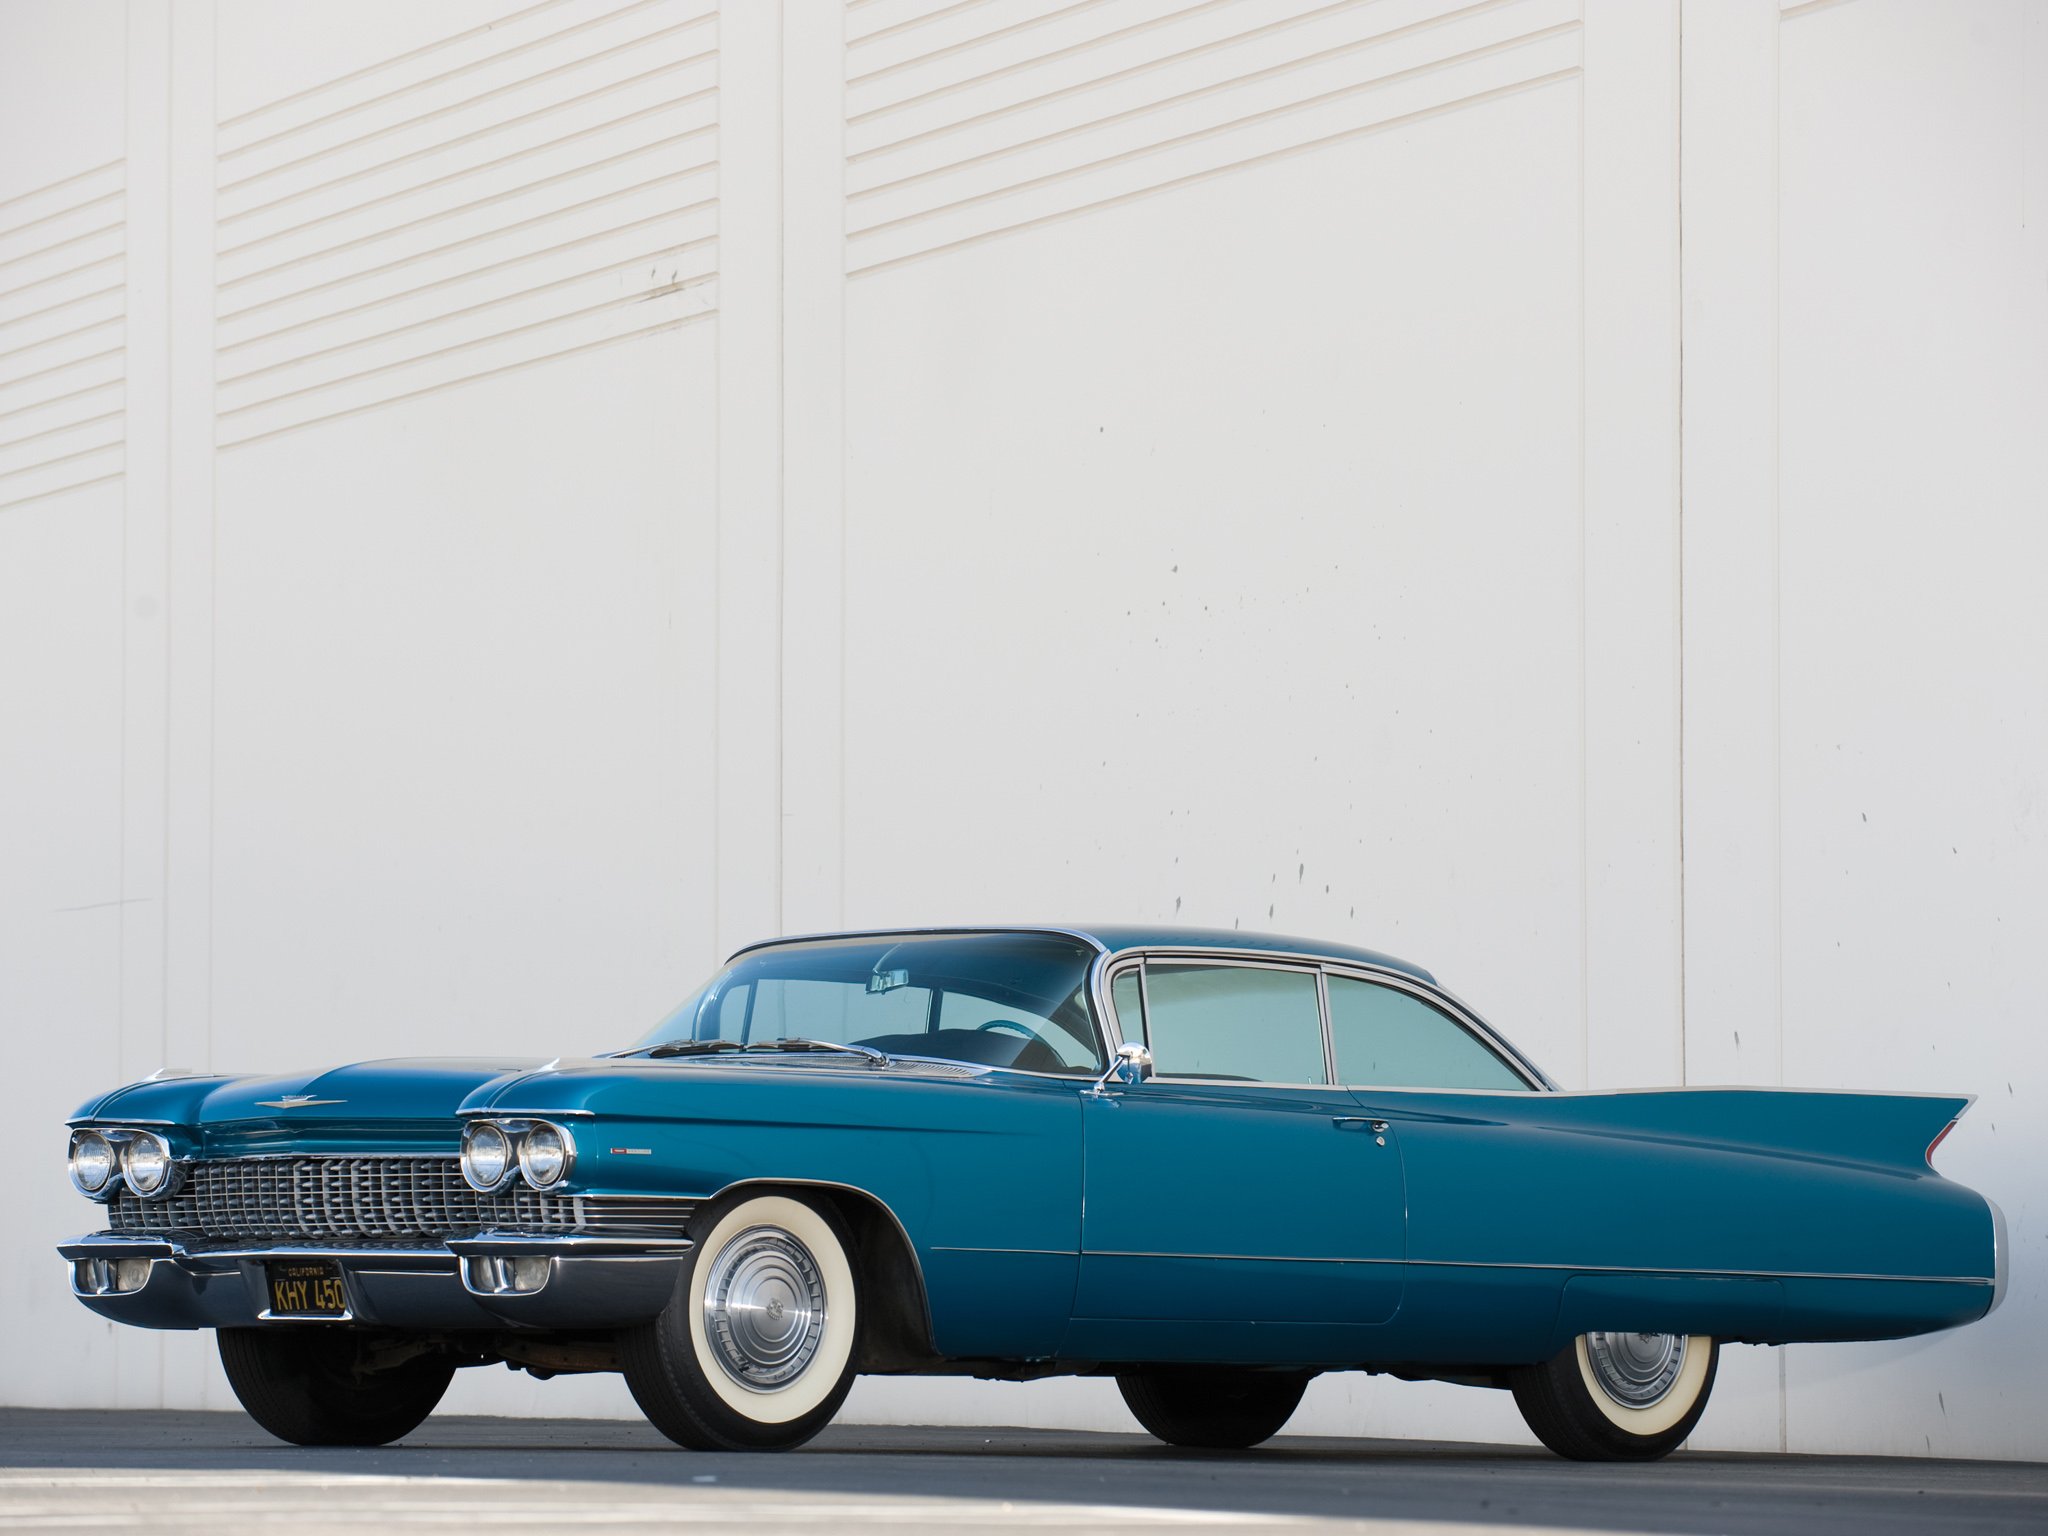 1960, Cadillac, Sixty two, 2 door, Hardtop, Coupe,  6237g , Luxury, Classic Wallpaper